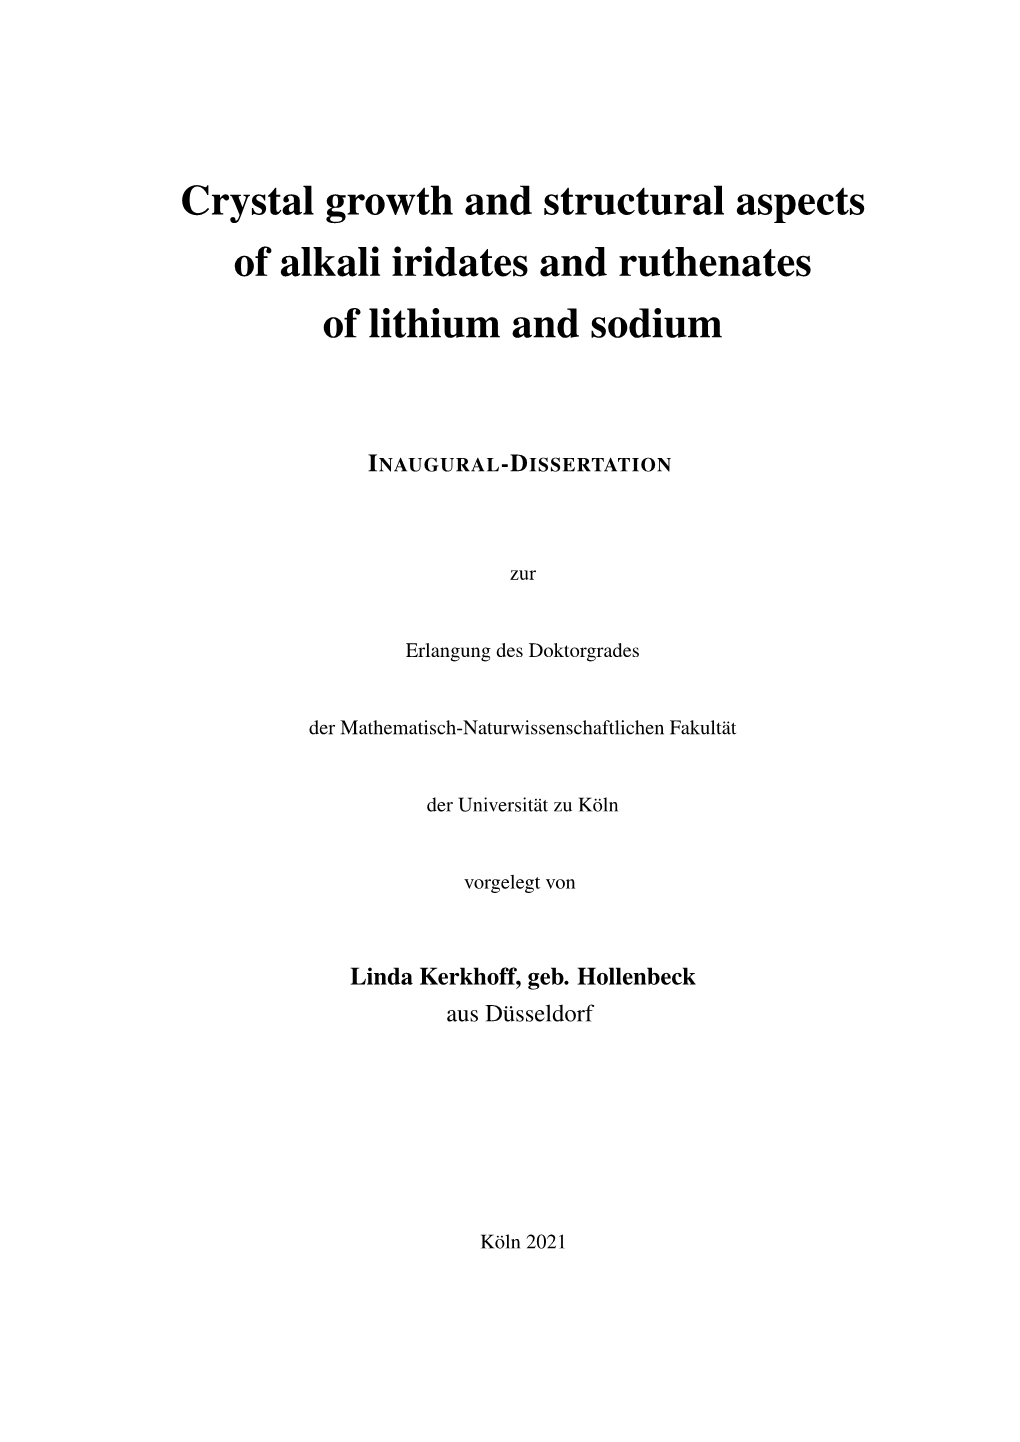 Crystal Growth and Structural Aspects of Alkali Iridates and Ruthenates of Lithium and Sodium